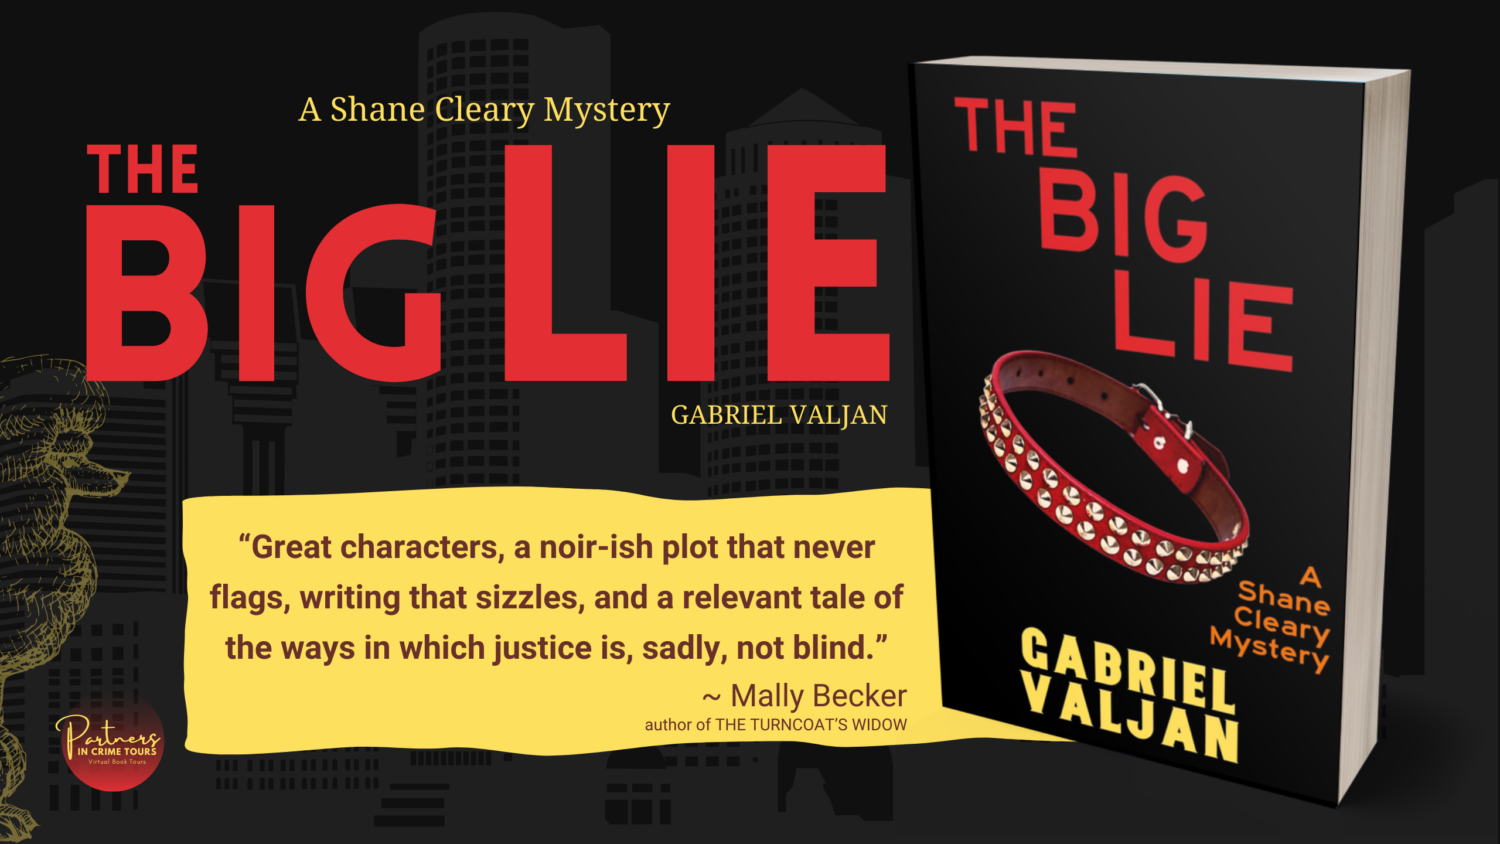 You are currently viewing The Big Lie: A Shane Cleary Mystery